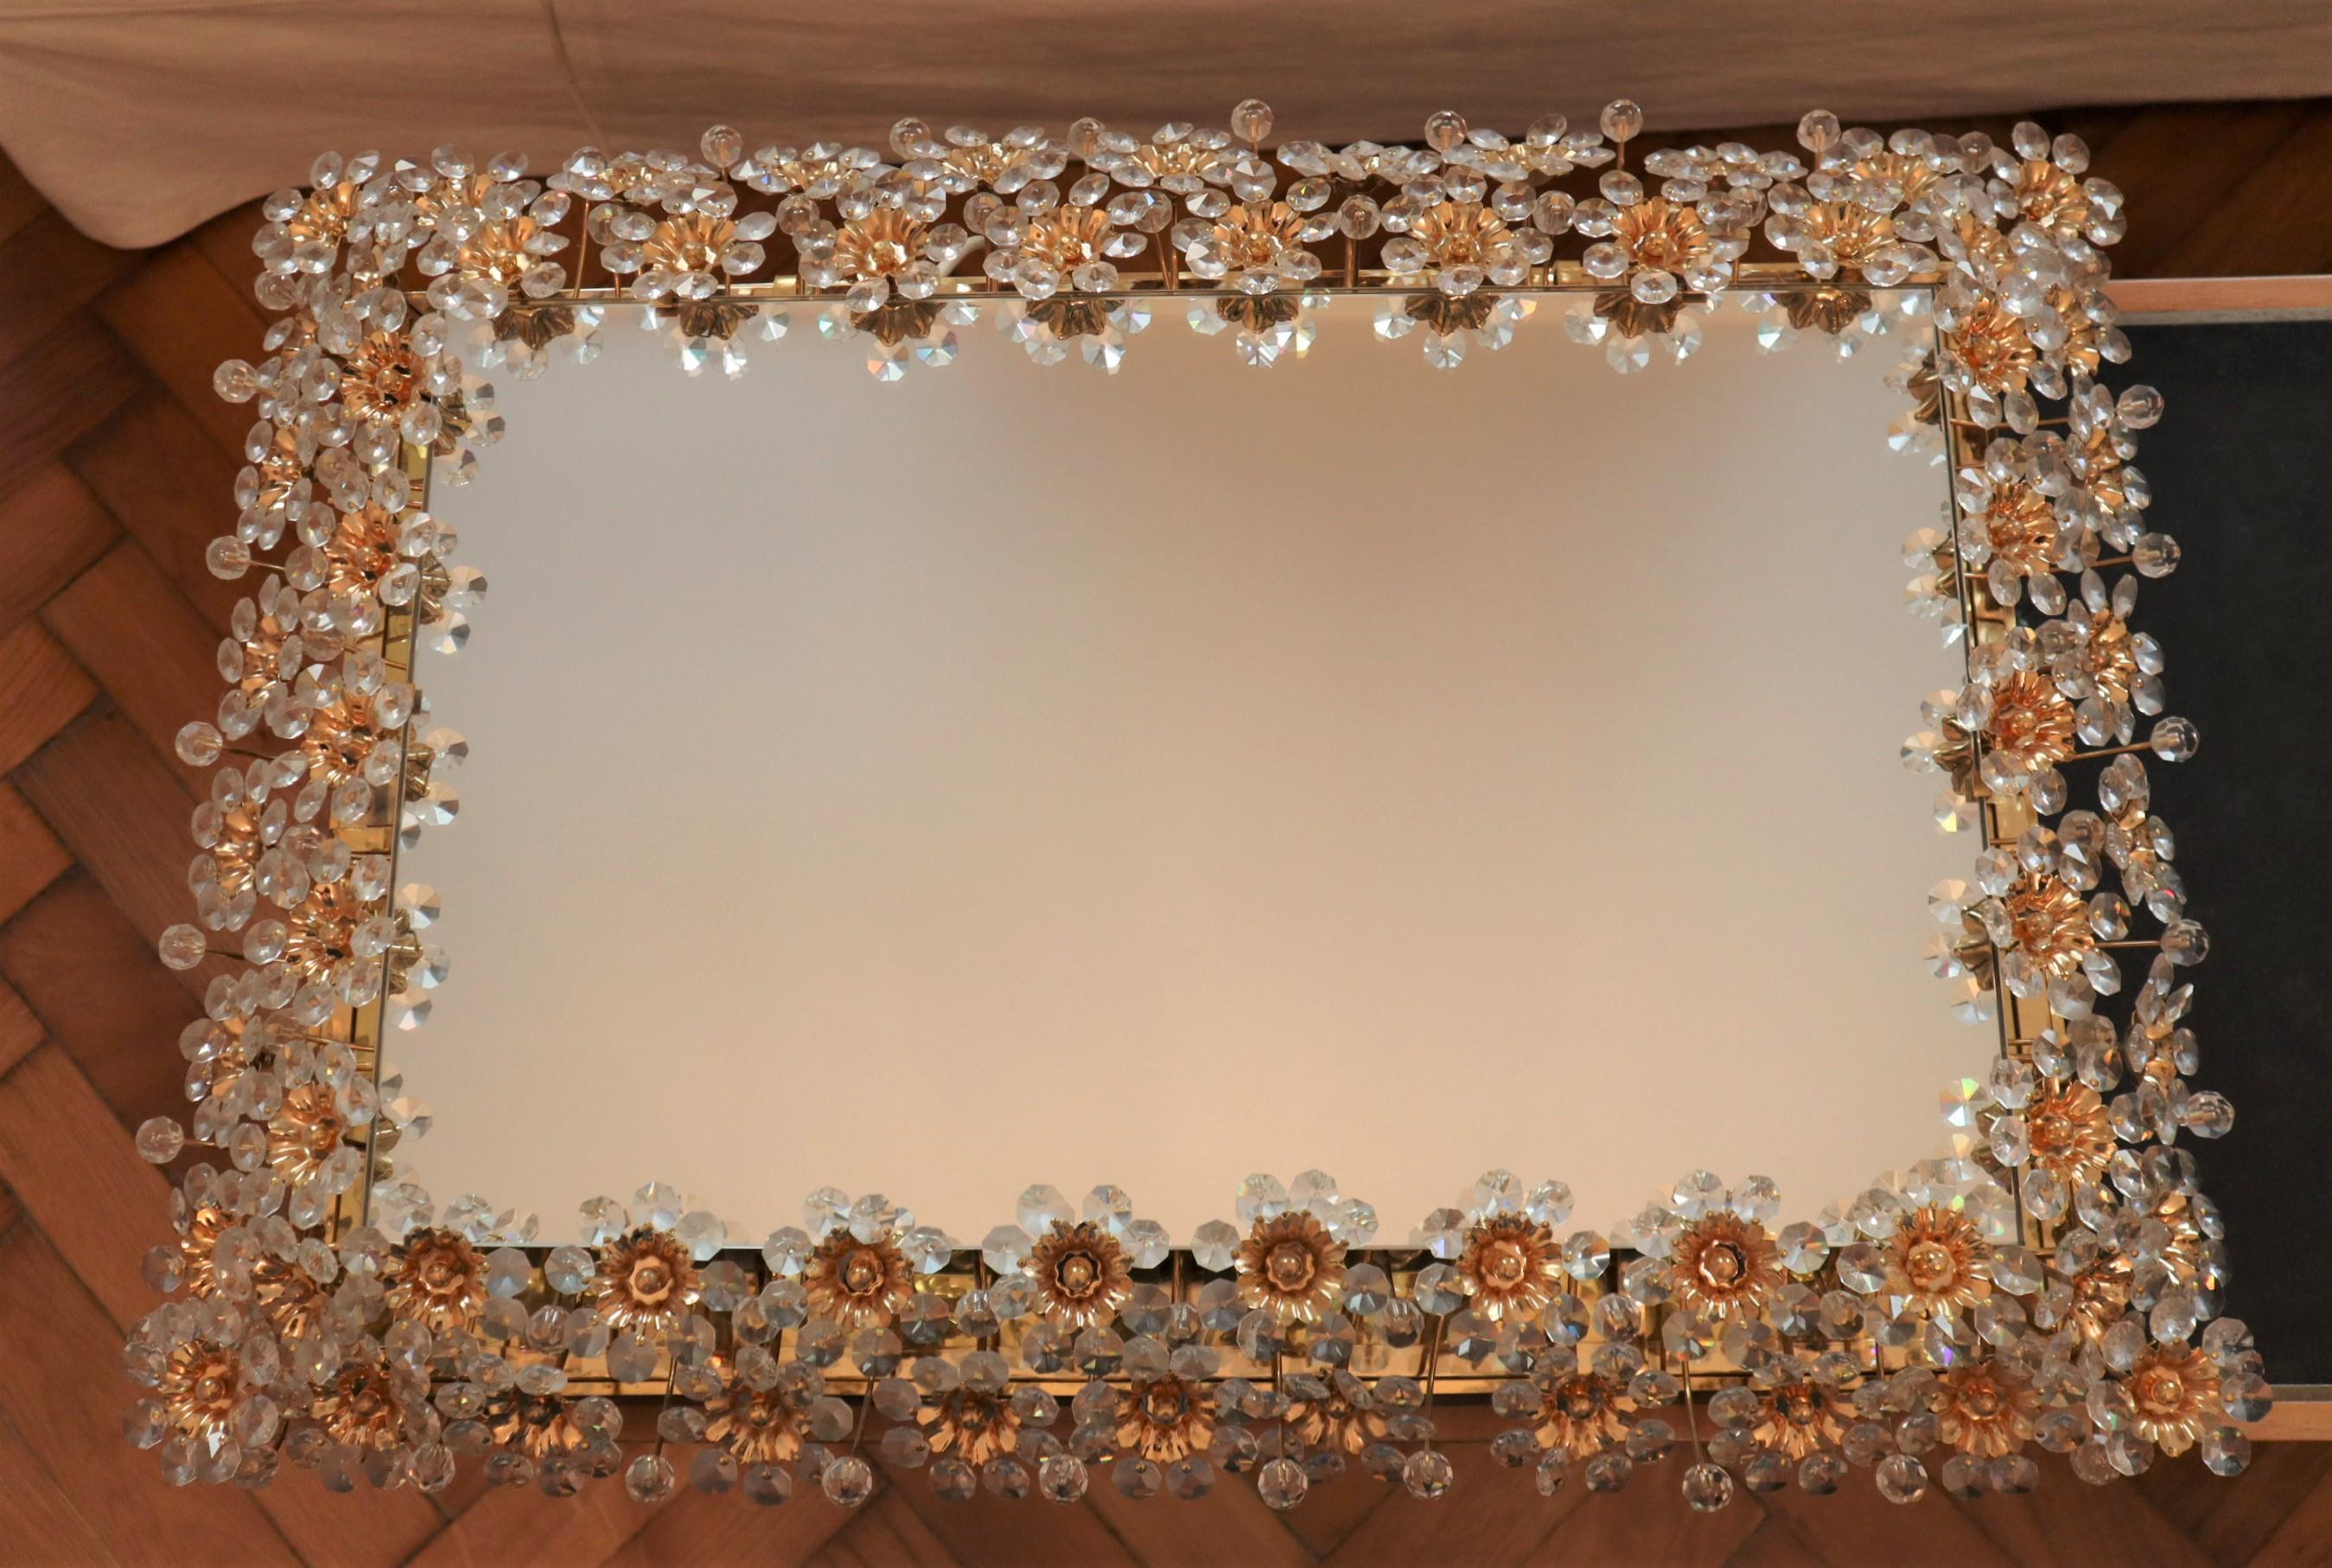 Mid-20th century illuminated rectangular wall mirror by German manufacturer Palwa.
The mirror is framed with a double border of delicate flowers and petals made from faceted crystals and beads that sparkle in the light. 
The frame is made from